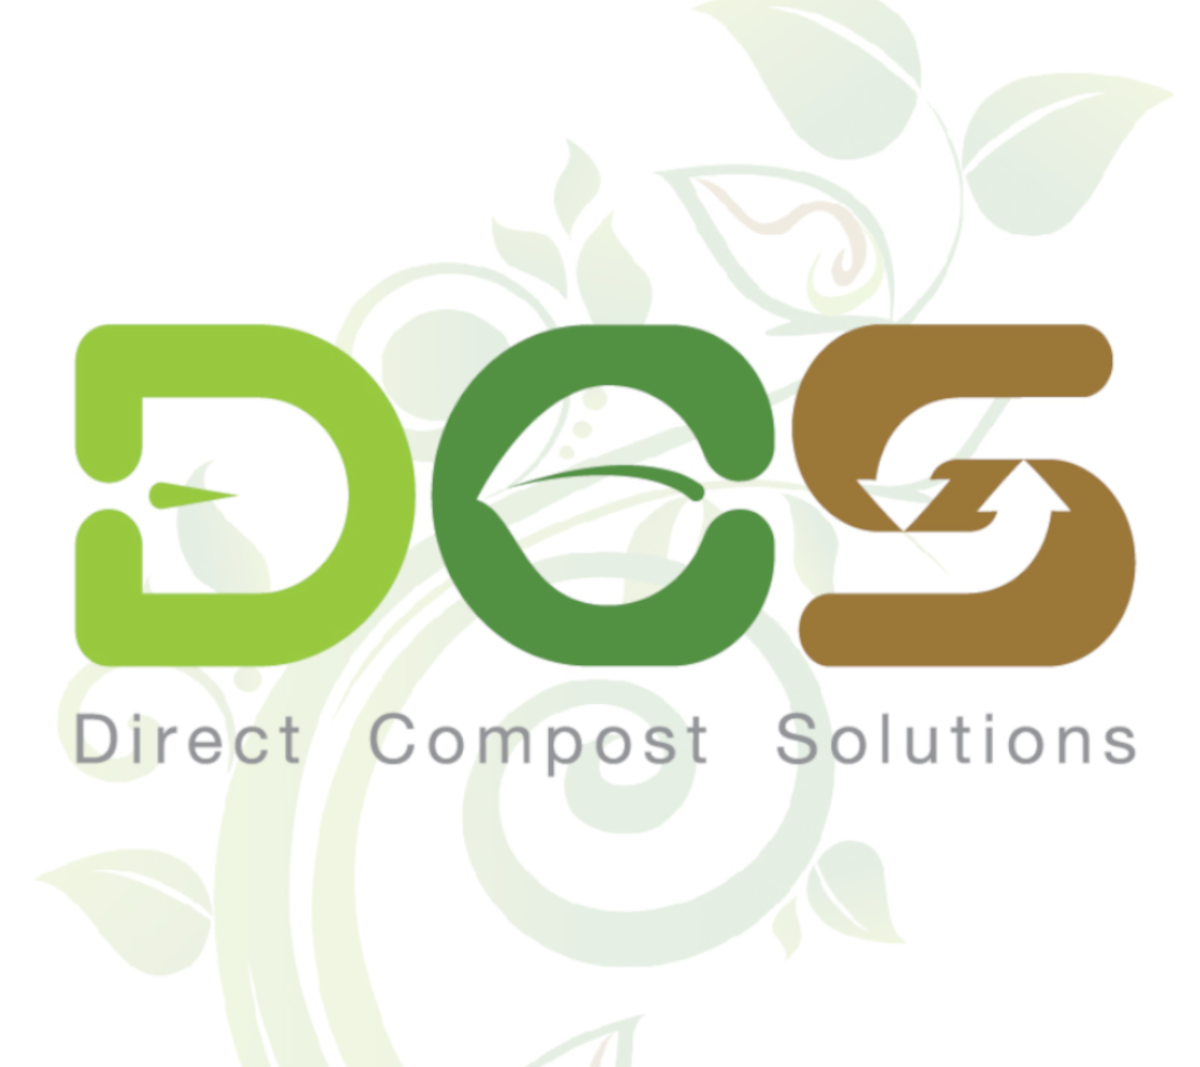 Direct Compost Solutions Pty Ltd